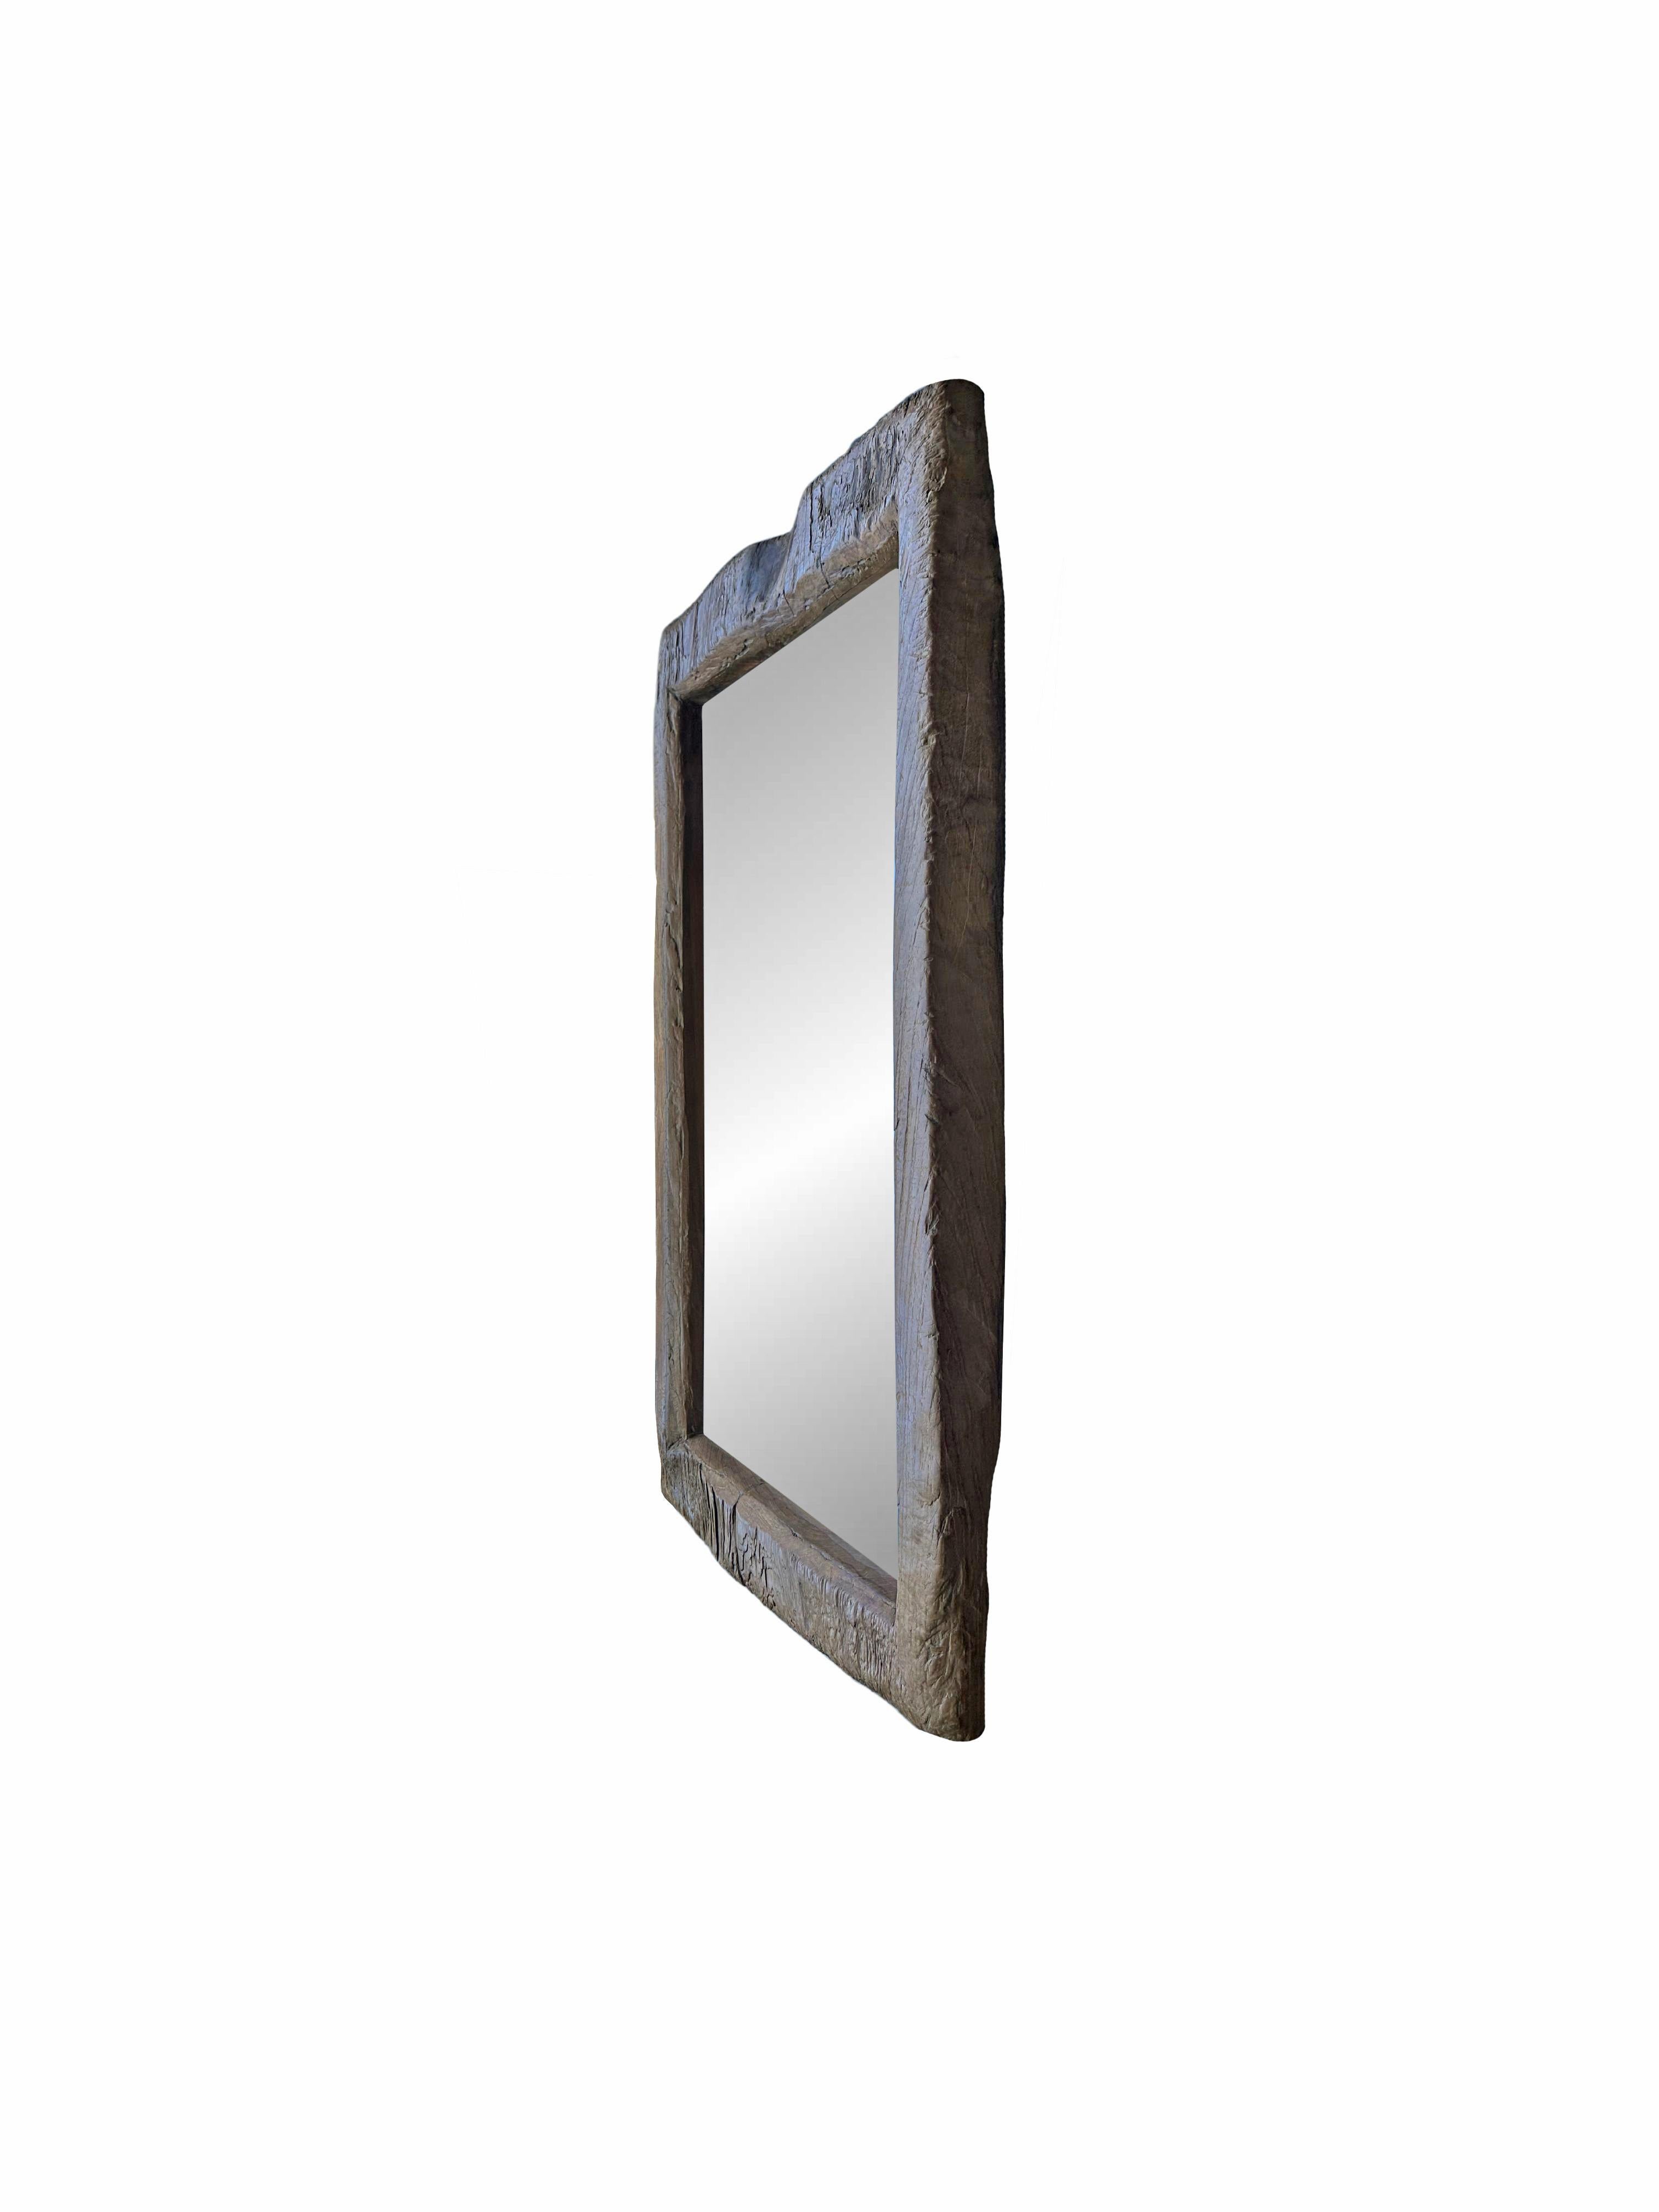 Contemporary Rustic Teak Wood Mirror With Wonderful Age Related Patina & Markings For Sale